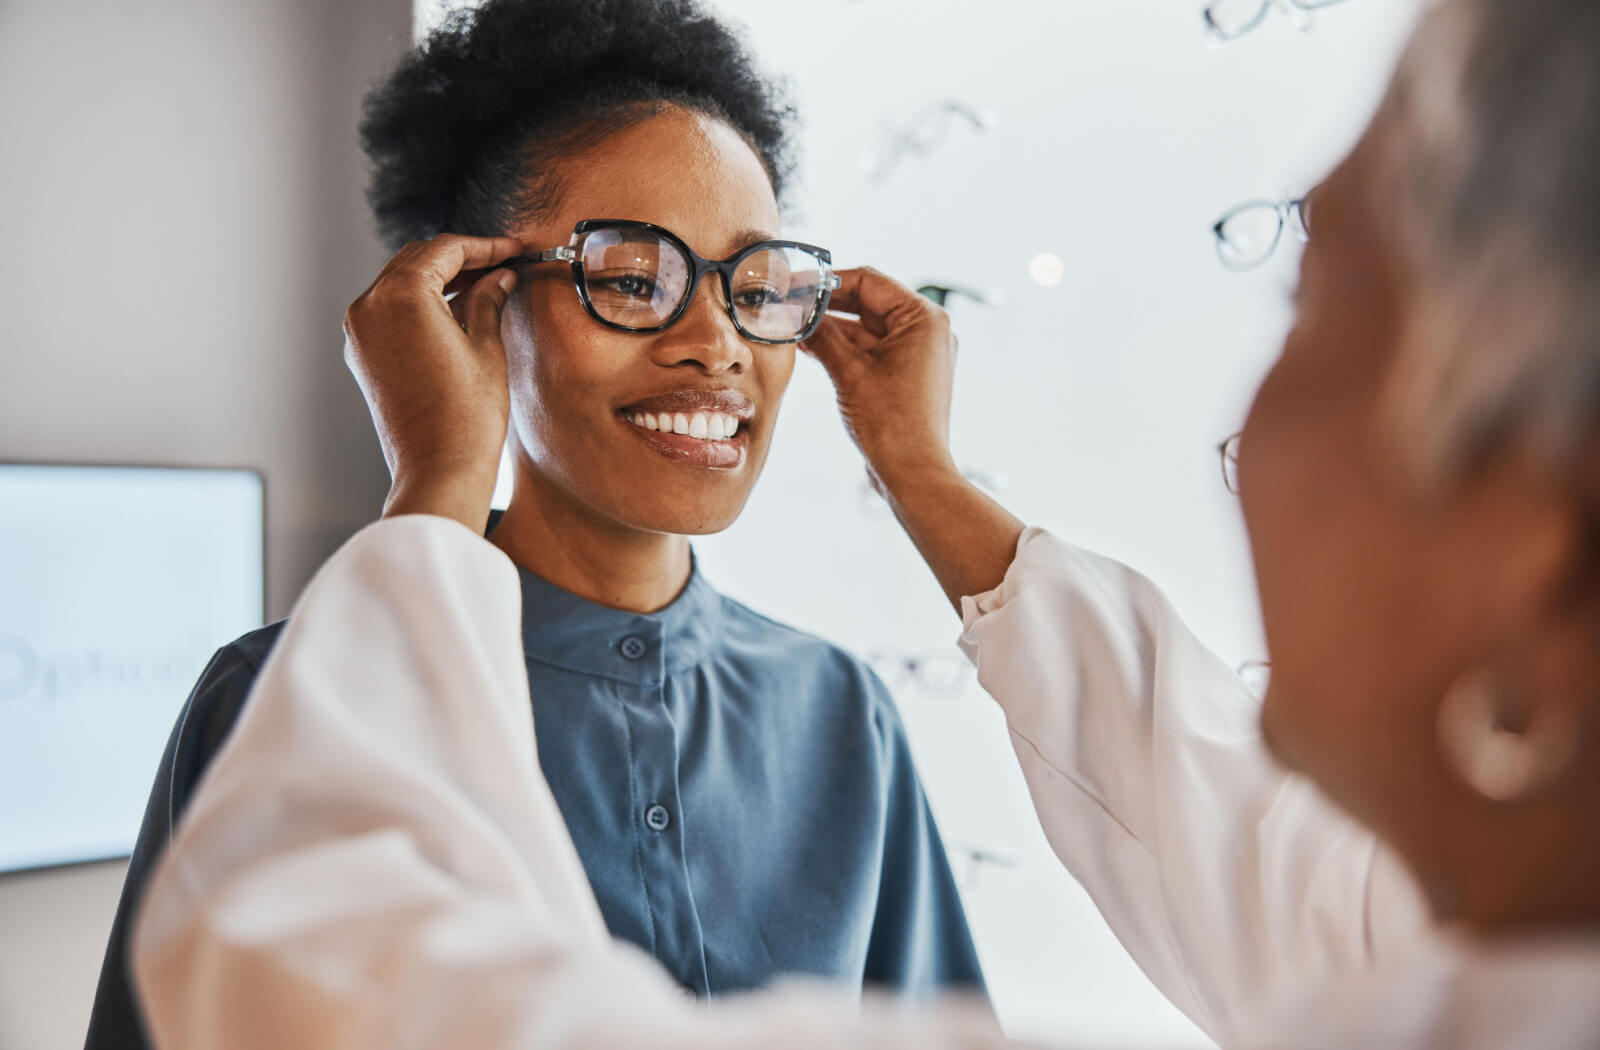 A young woman smiling and trying on glasses in a store while being assisted by an optometrist.